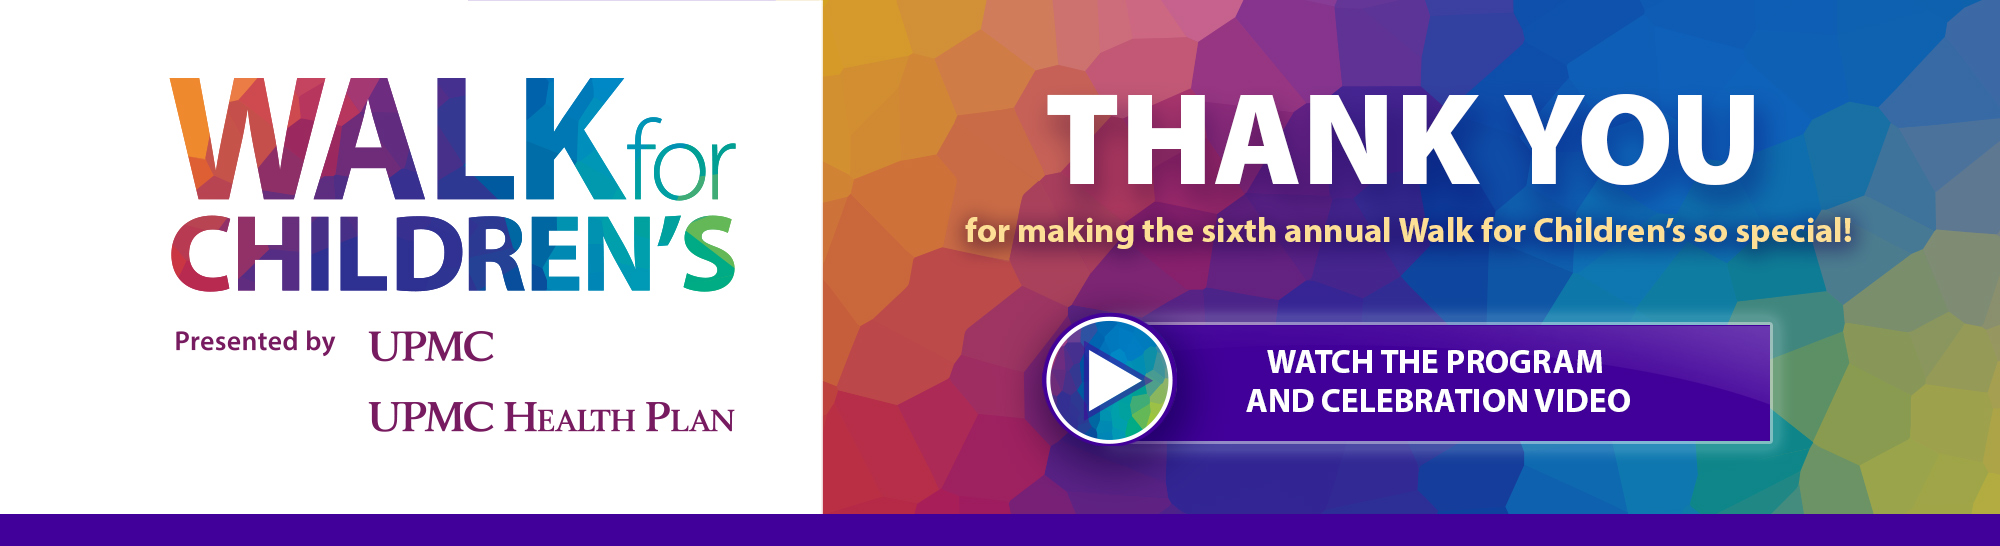 Walk for Children's - Thank you for making the sixth annual Walk for Children's so special! Watch the program and celebration video.